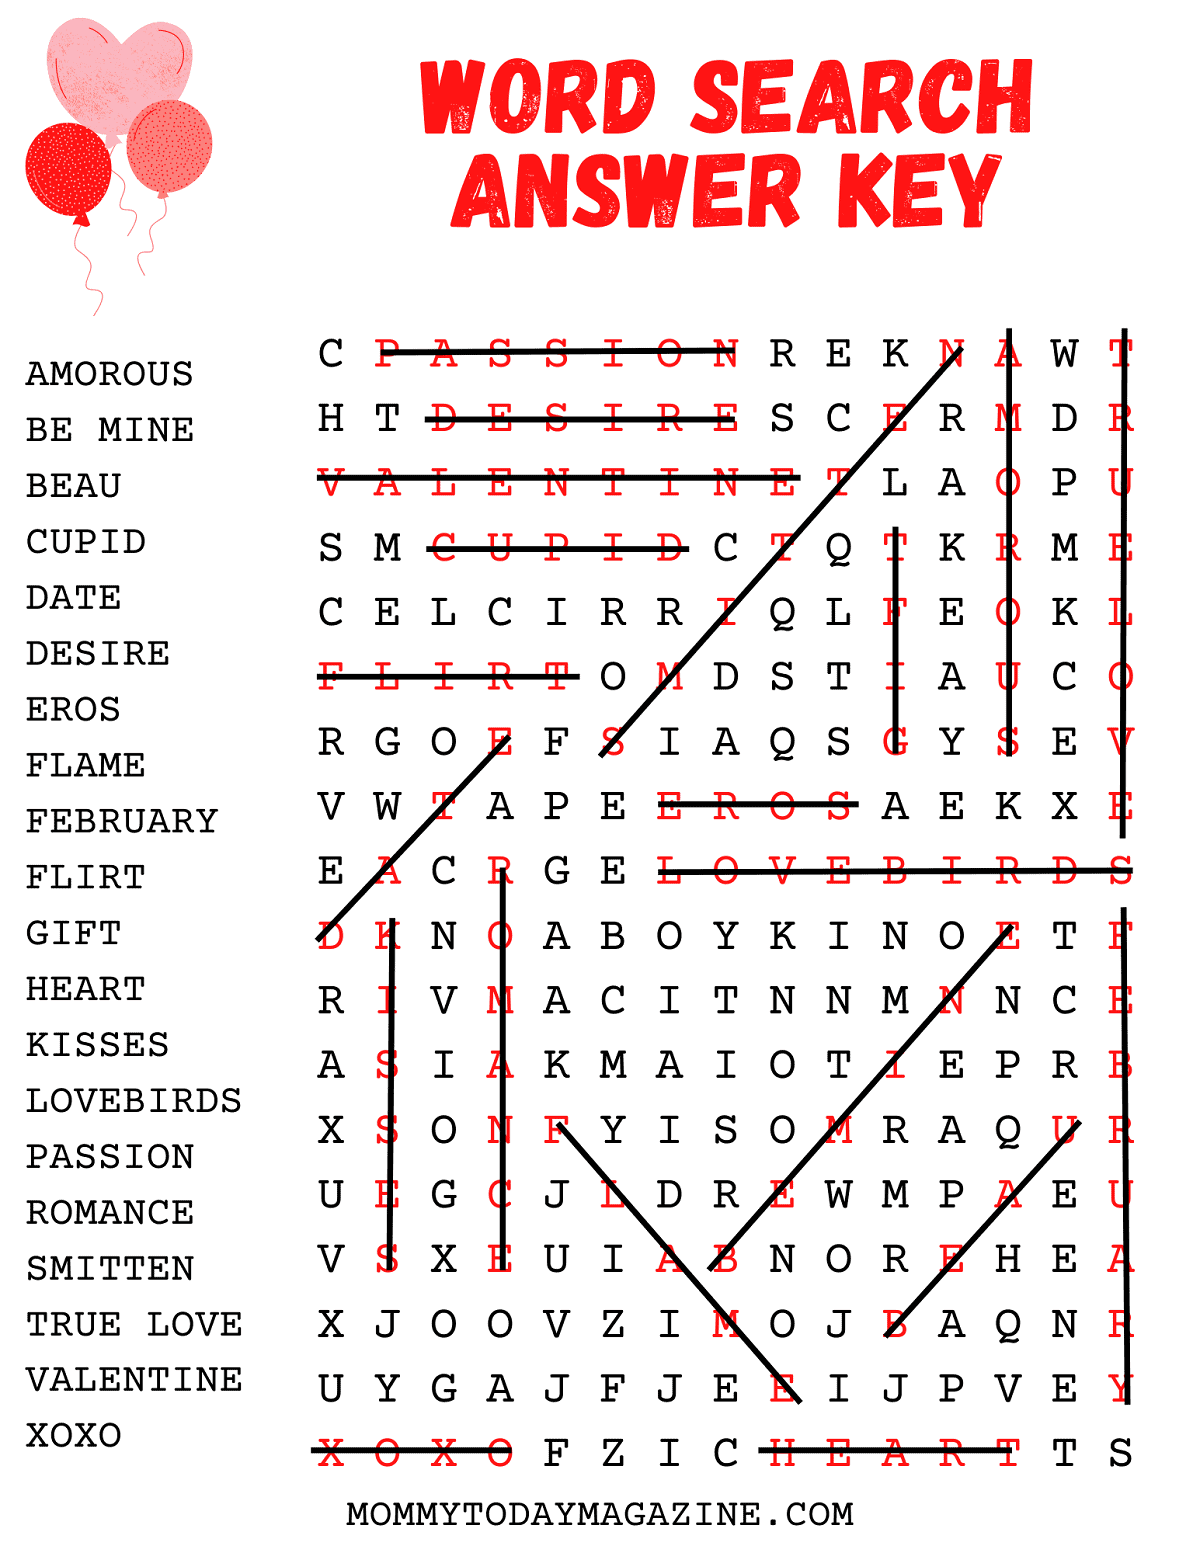 Free Printable Valentine’s Day Word Search Answer Key